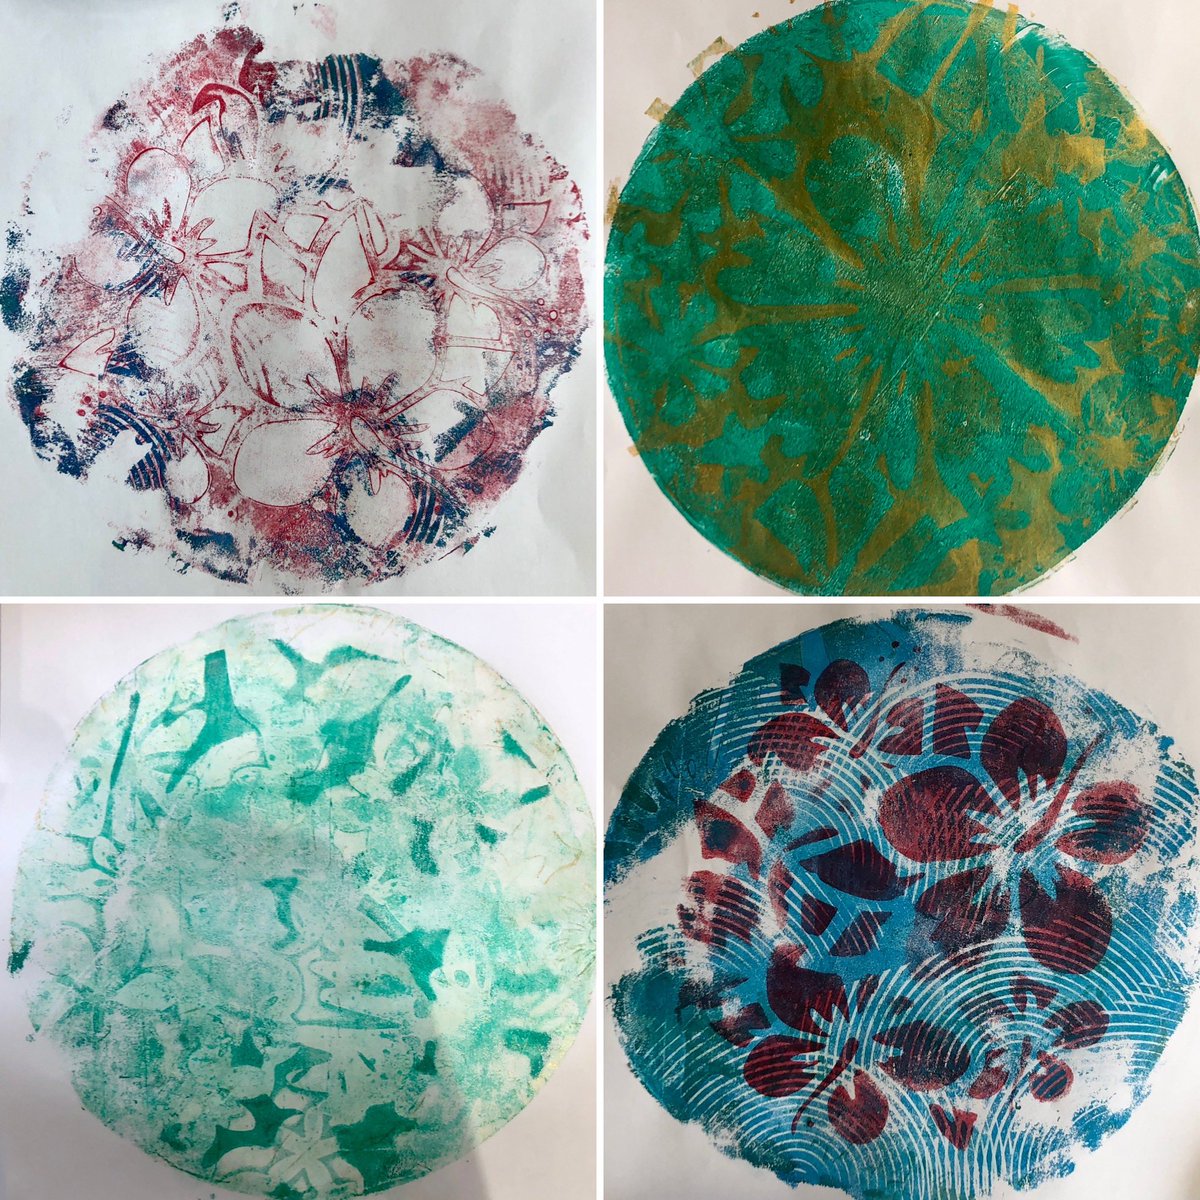 Last week Cienne discovered her practice is inspired by nature she also made the decision that printmaking is a process she enjoys & wants to develop. So today during here 1-2-1 @touchbasepears she created these beautiful Gelli prints exploring nature and layering #ThisisMyArt